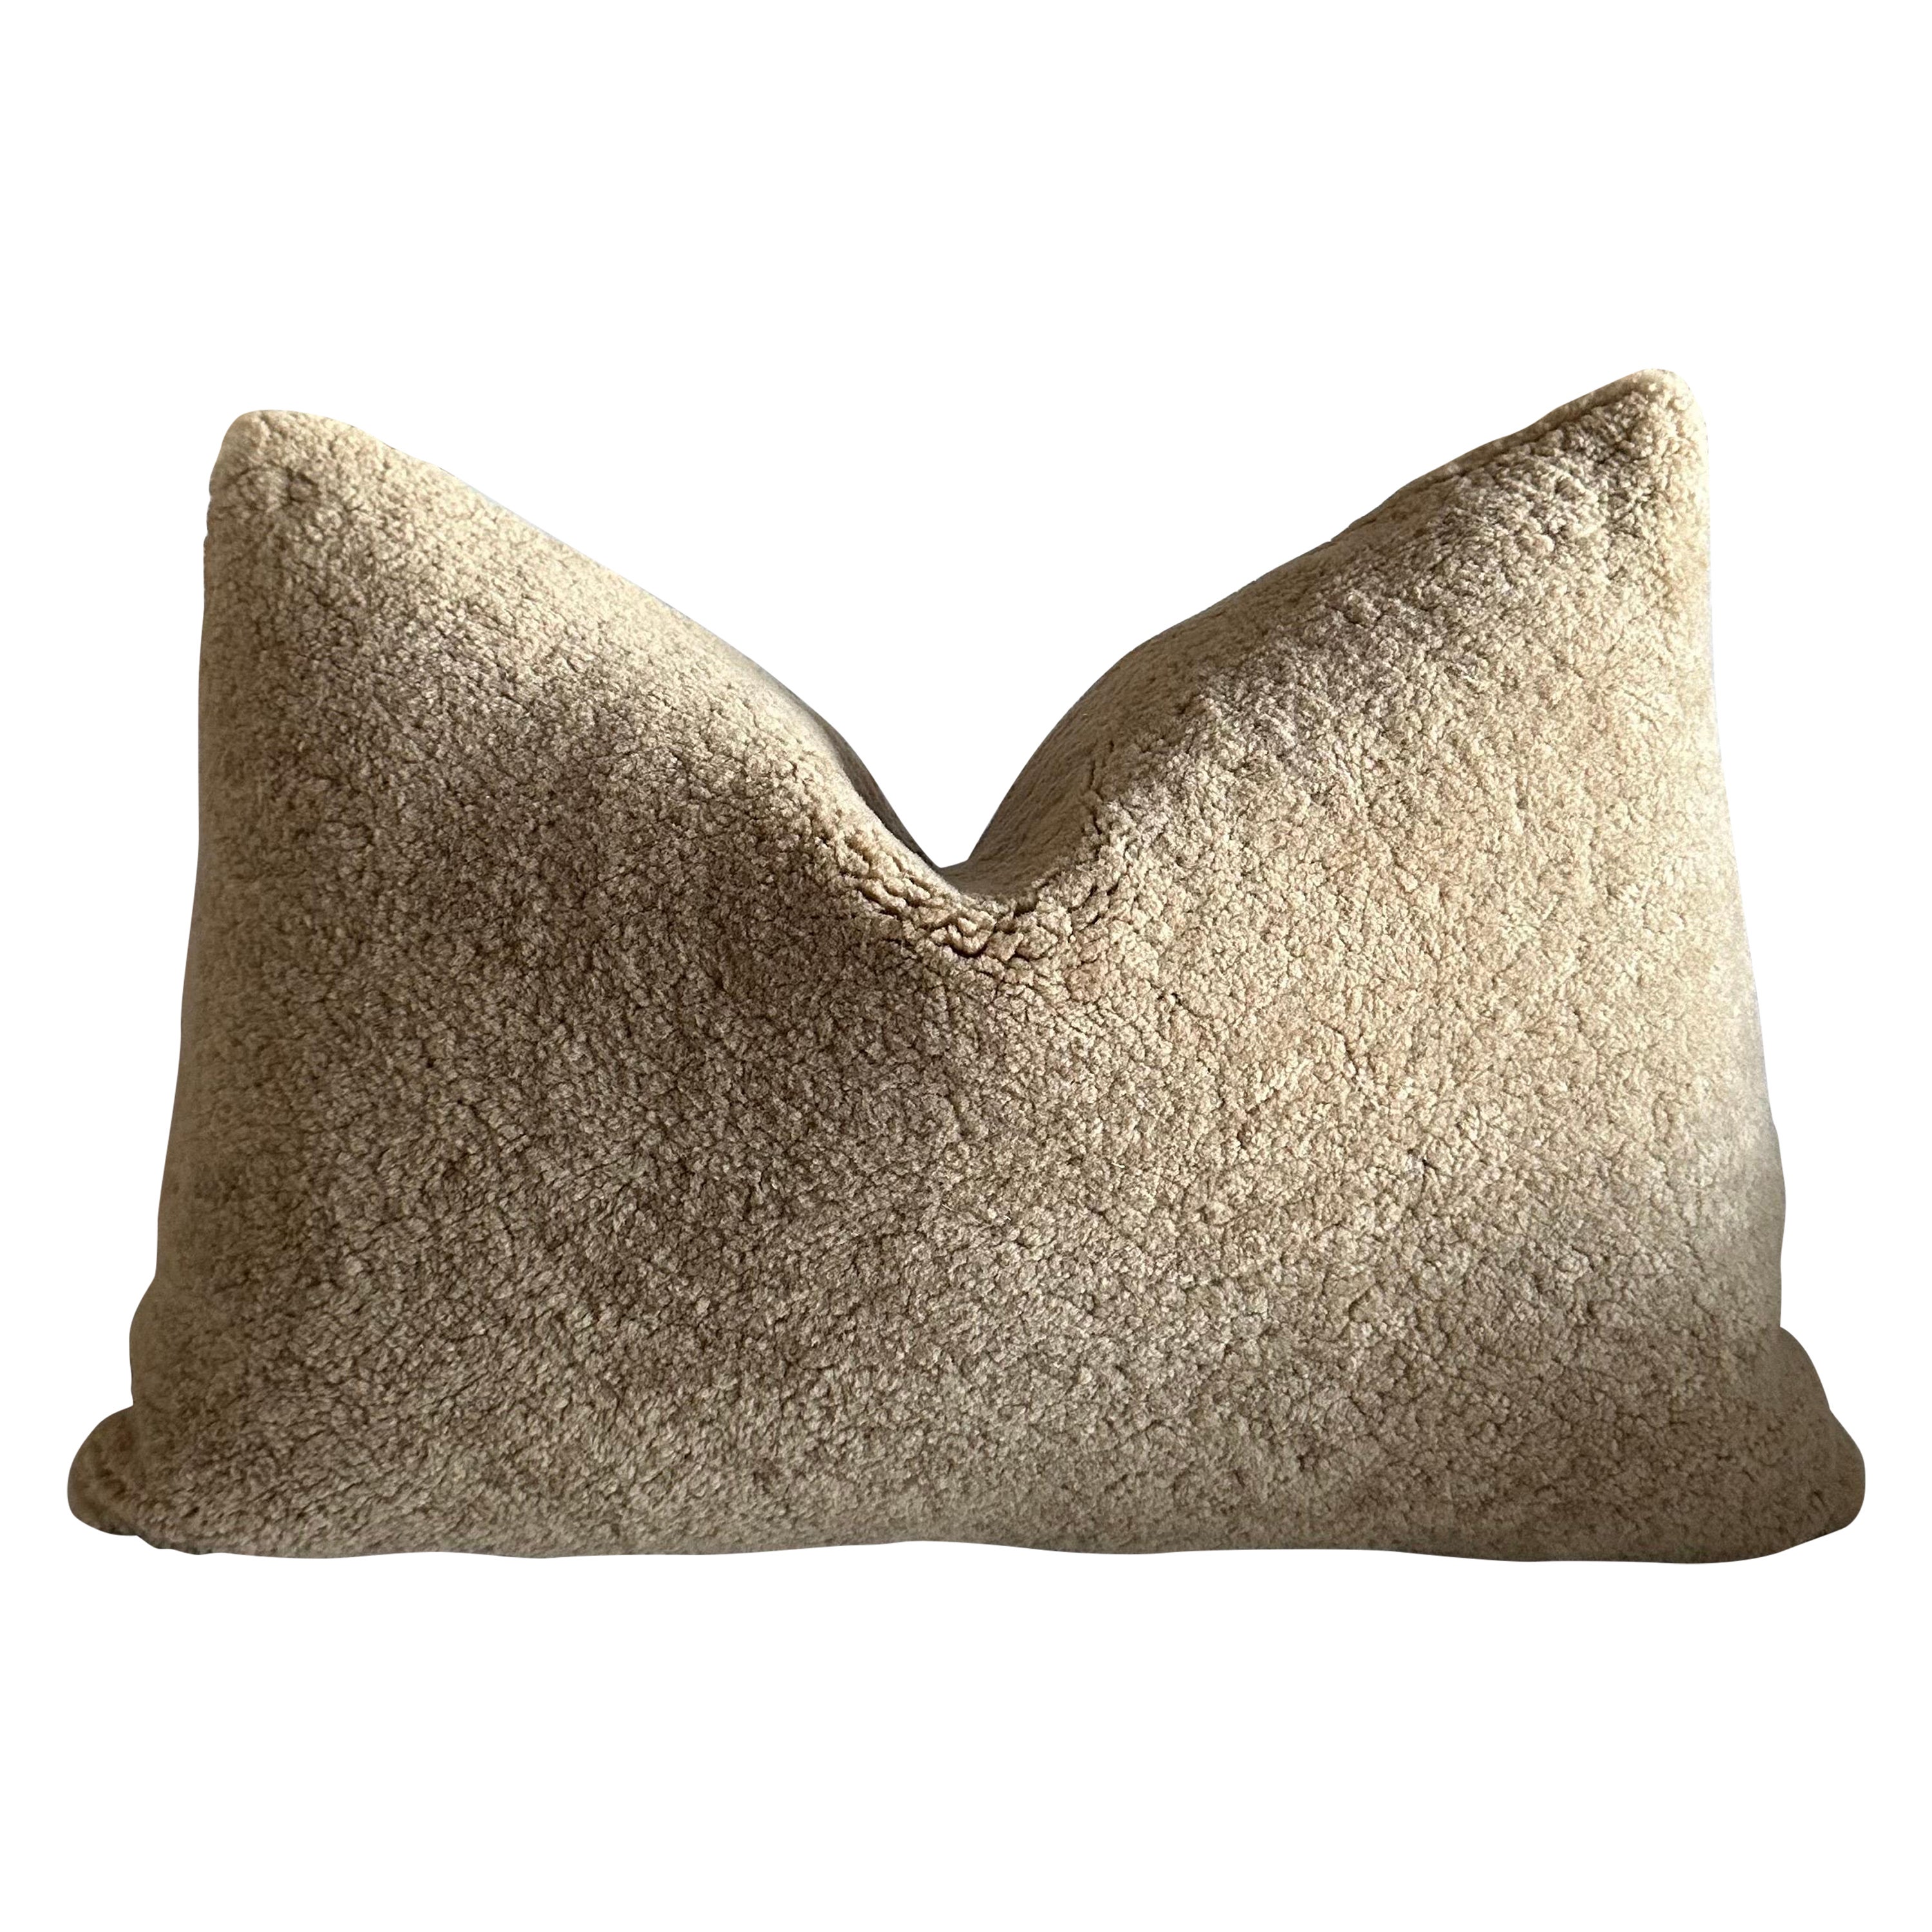 Natural Shearling Lumbar Pillow in Cappuccino Color with Brass Zipper